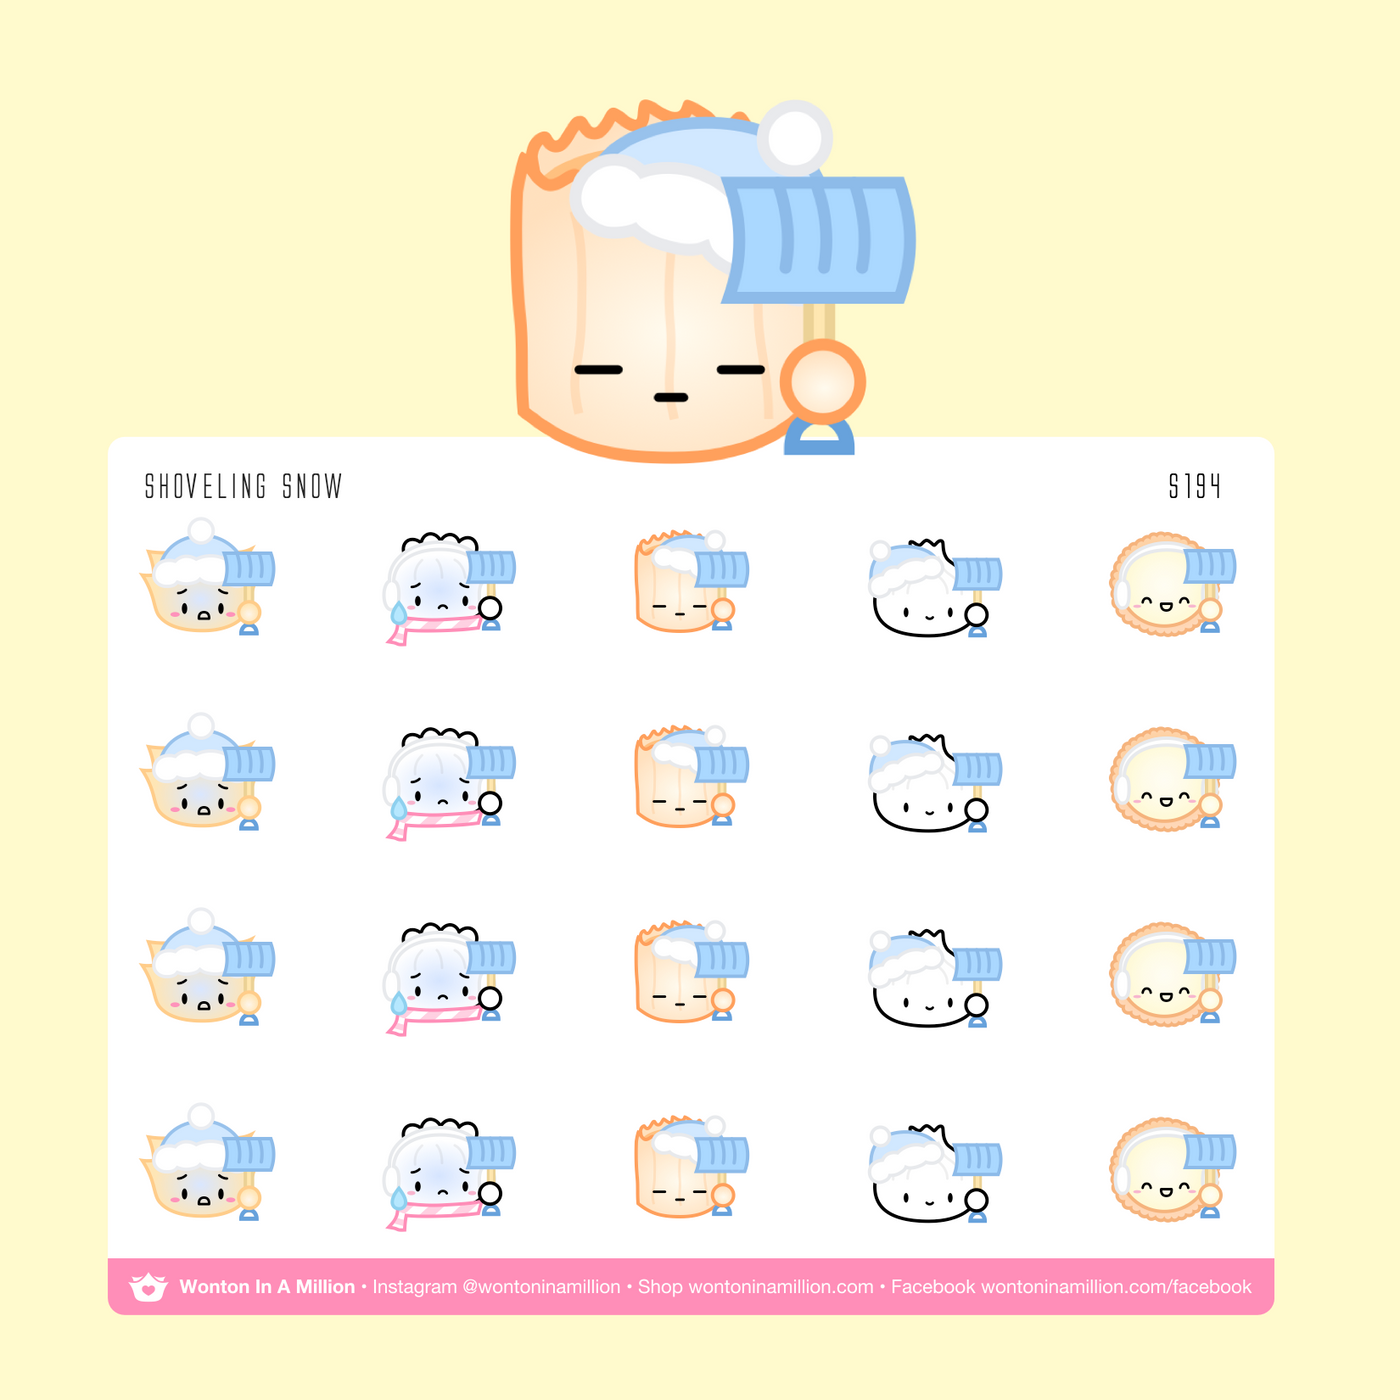 S194 | Snow Shoveling Stickers